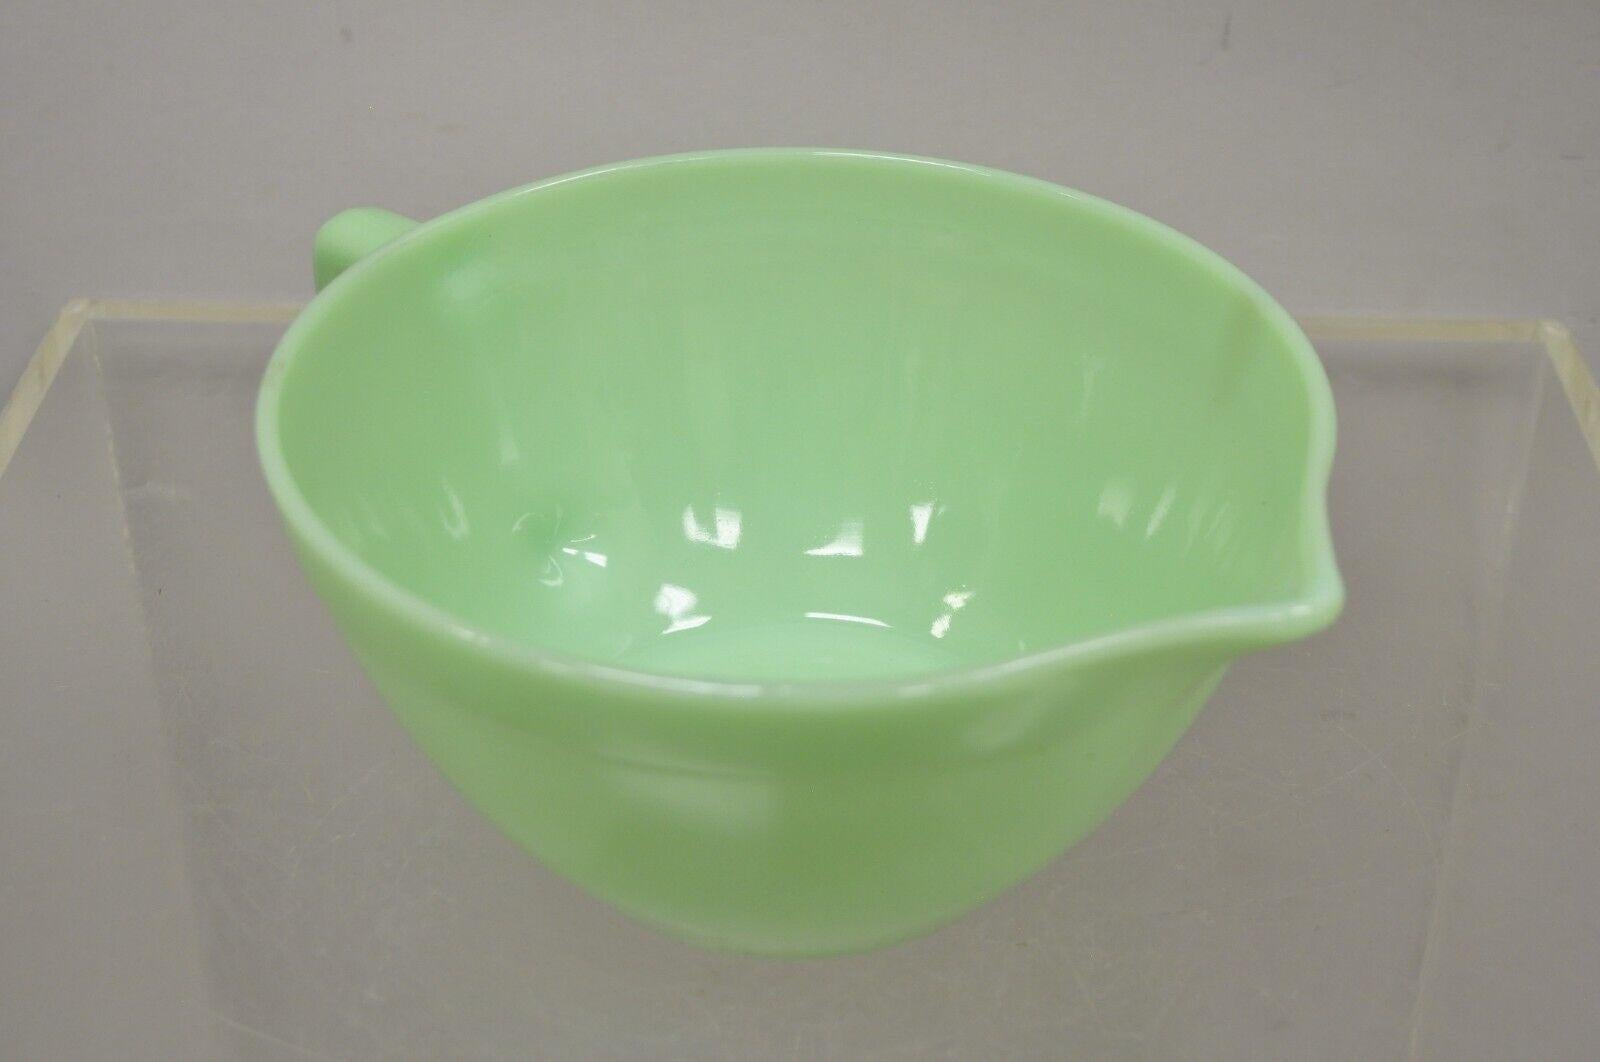 Vintage fire king oven ware jadeite green batter bowl with spout & handle. Circa mid-20th century. Measurements: 4